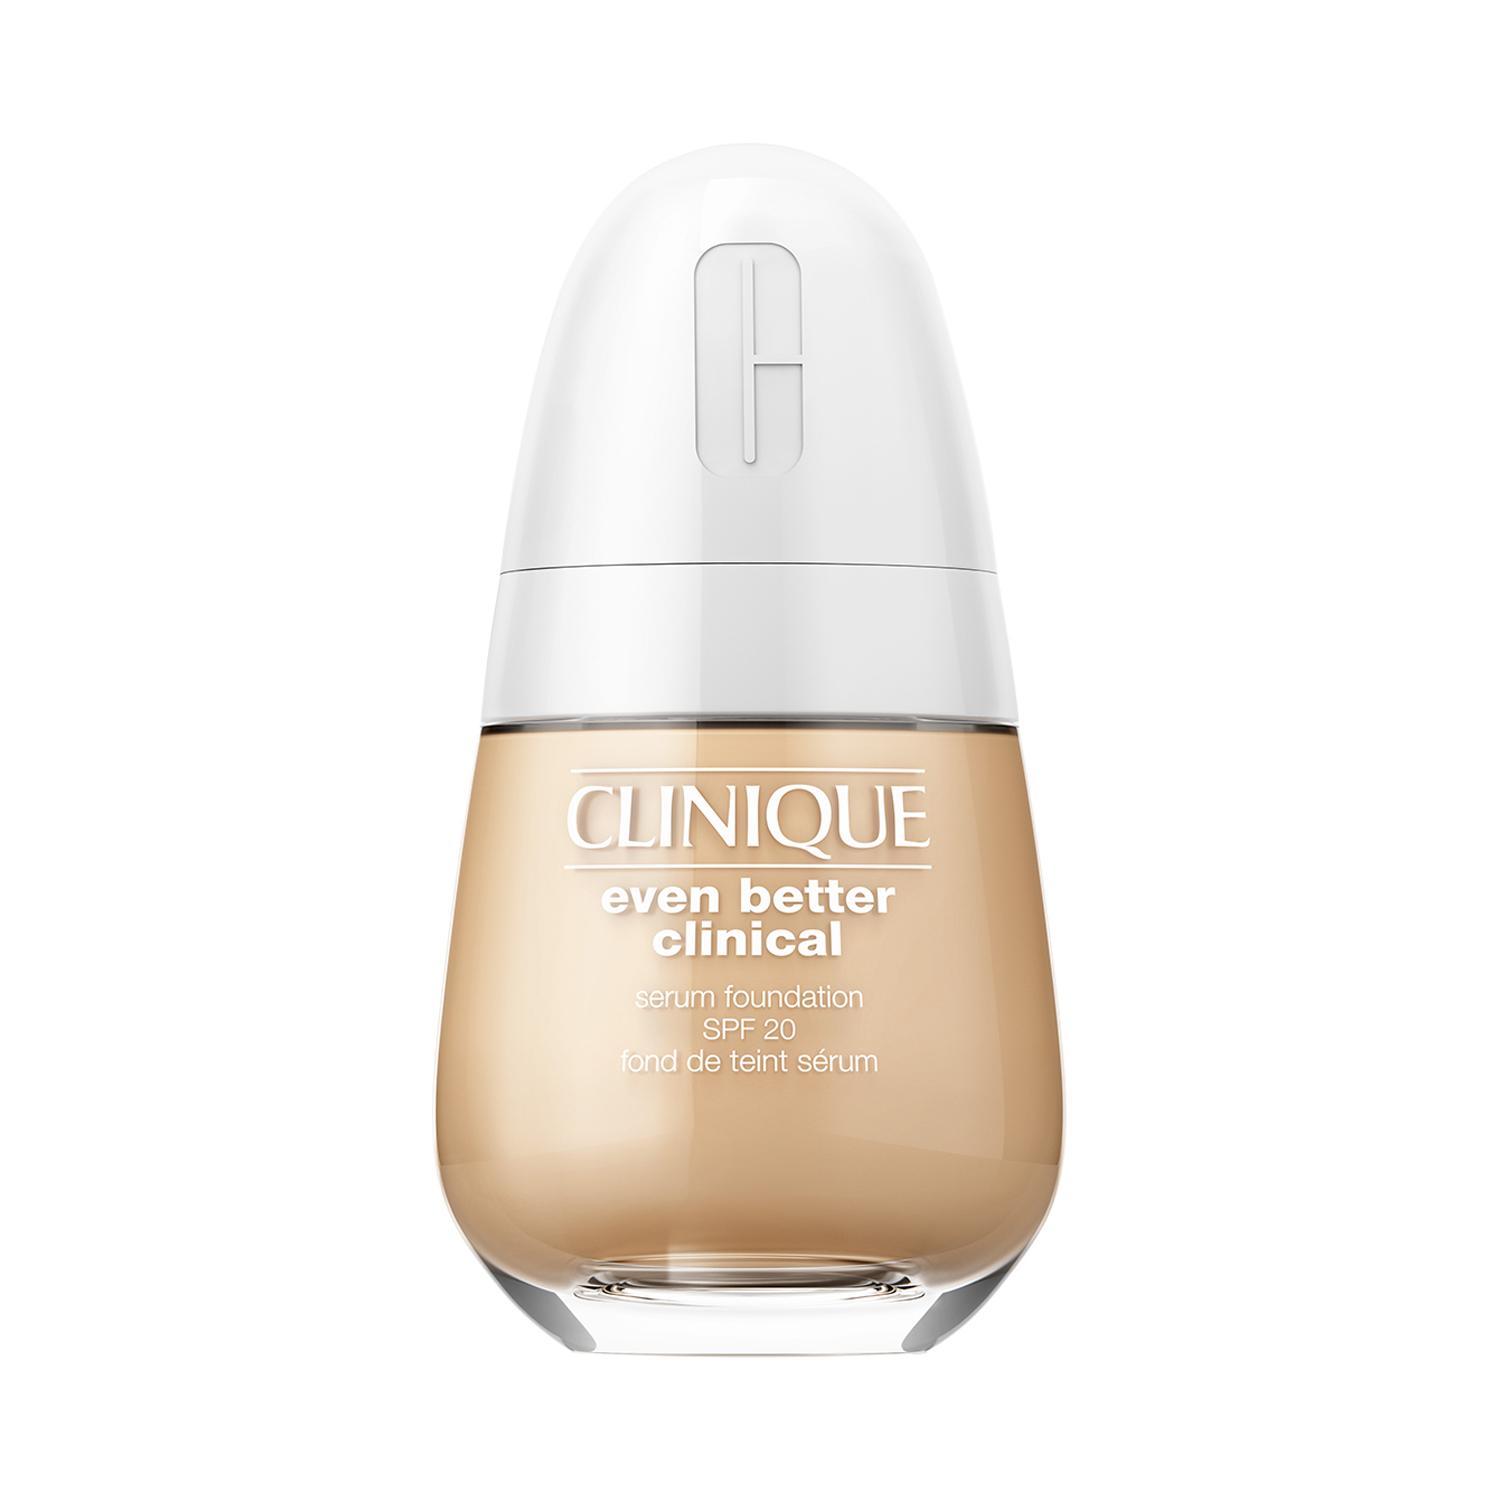 CLINIQUE | CLINIQUE Even Better Clinical Serum Foundation Broad Spectrum SPF 20 - WN 76 Toasted Wheat (30ml)